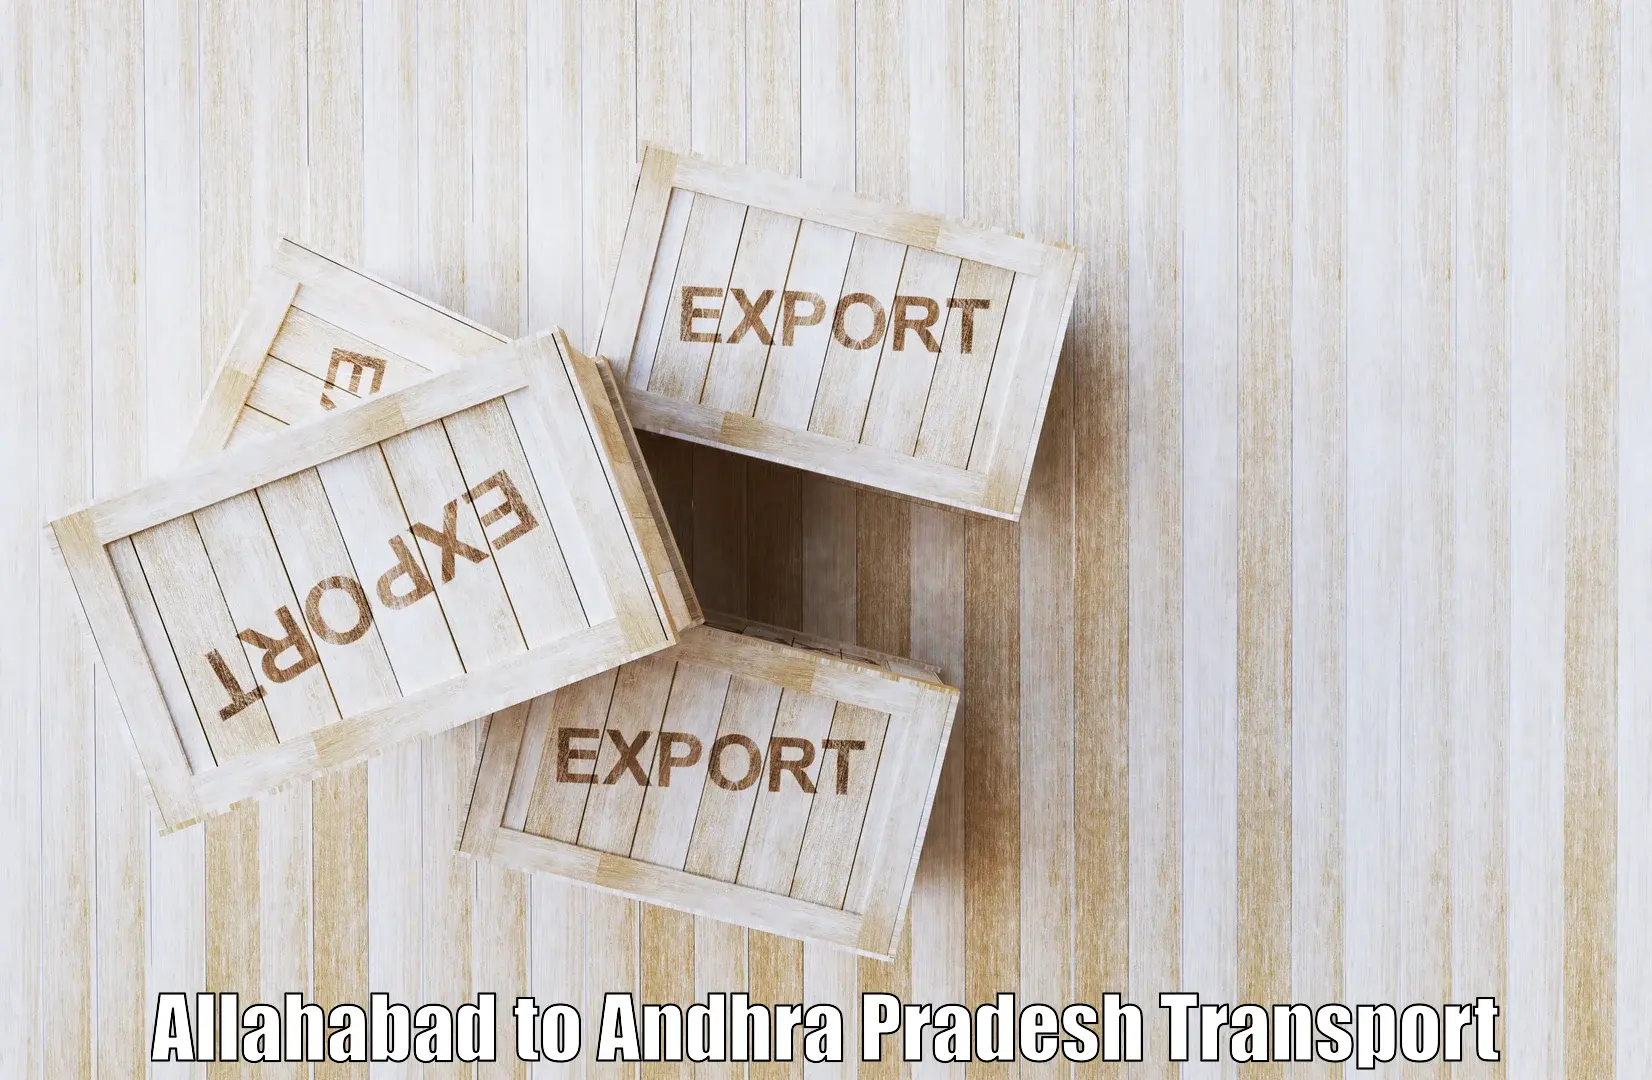 Express transport services in Allahabad to Visakhapatnam Port